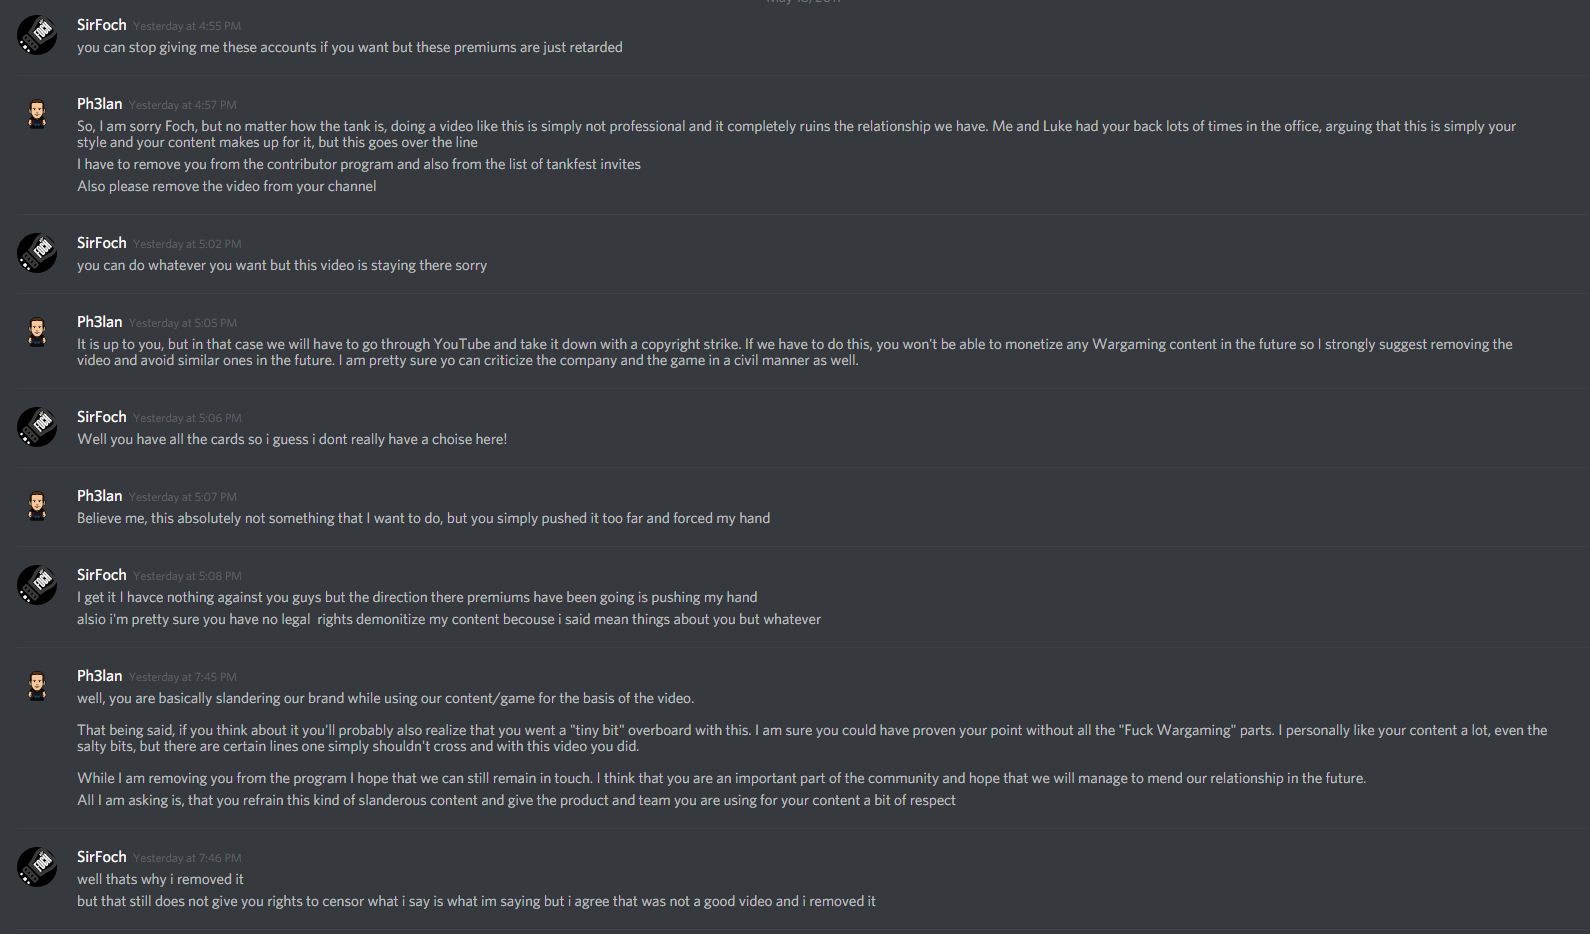 Wargaming Rep Threatens Copyright Strike In These Discord Messages #2